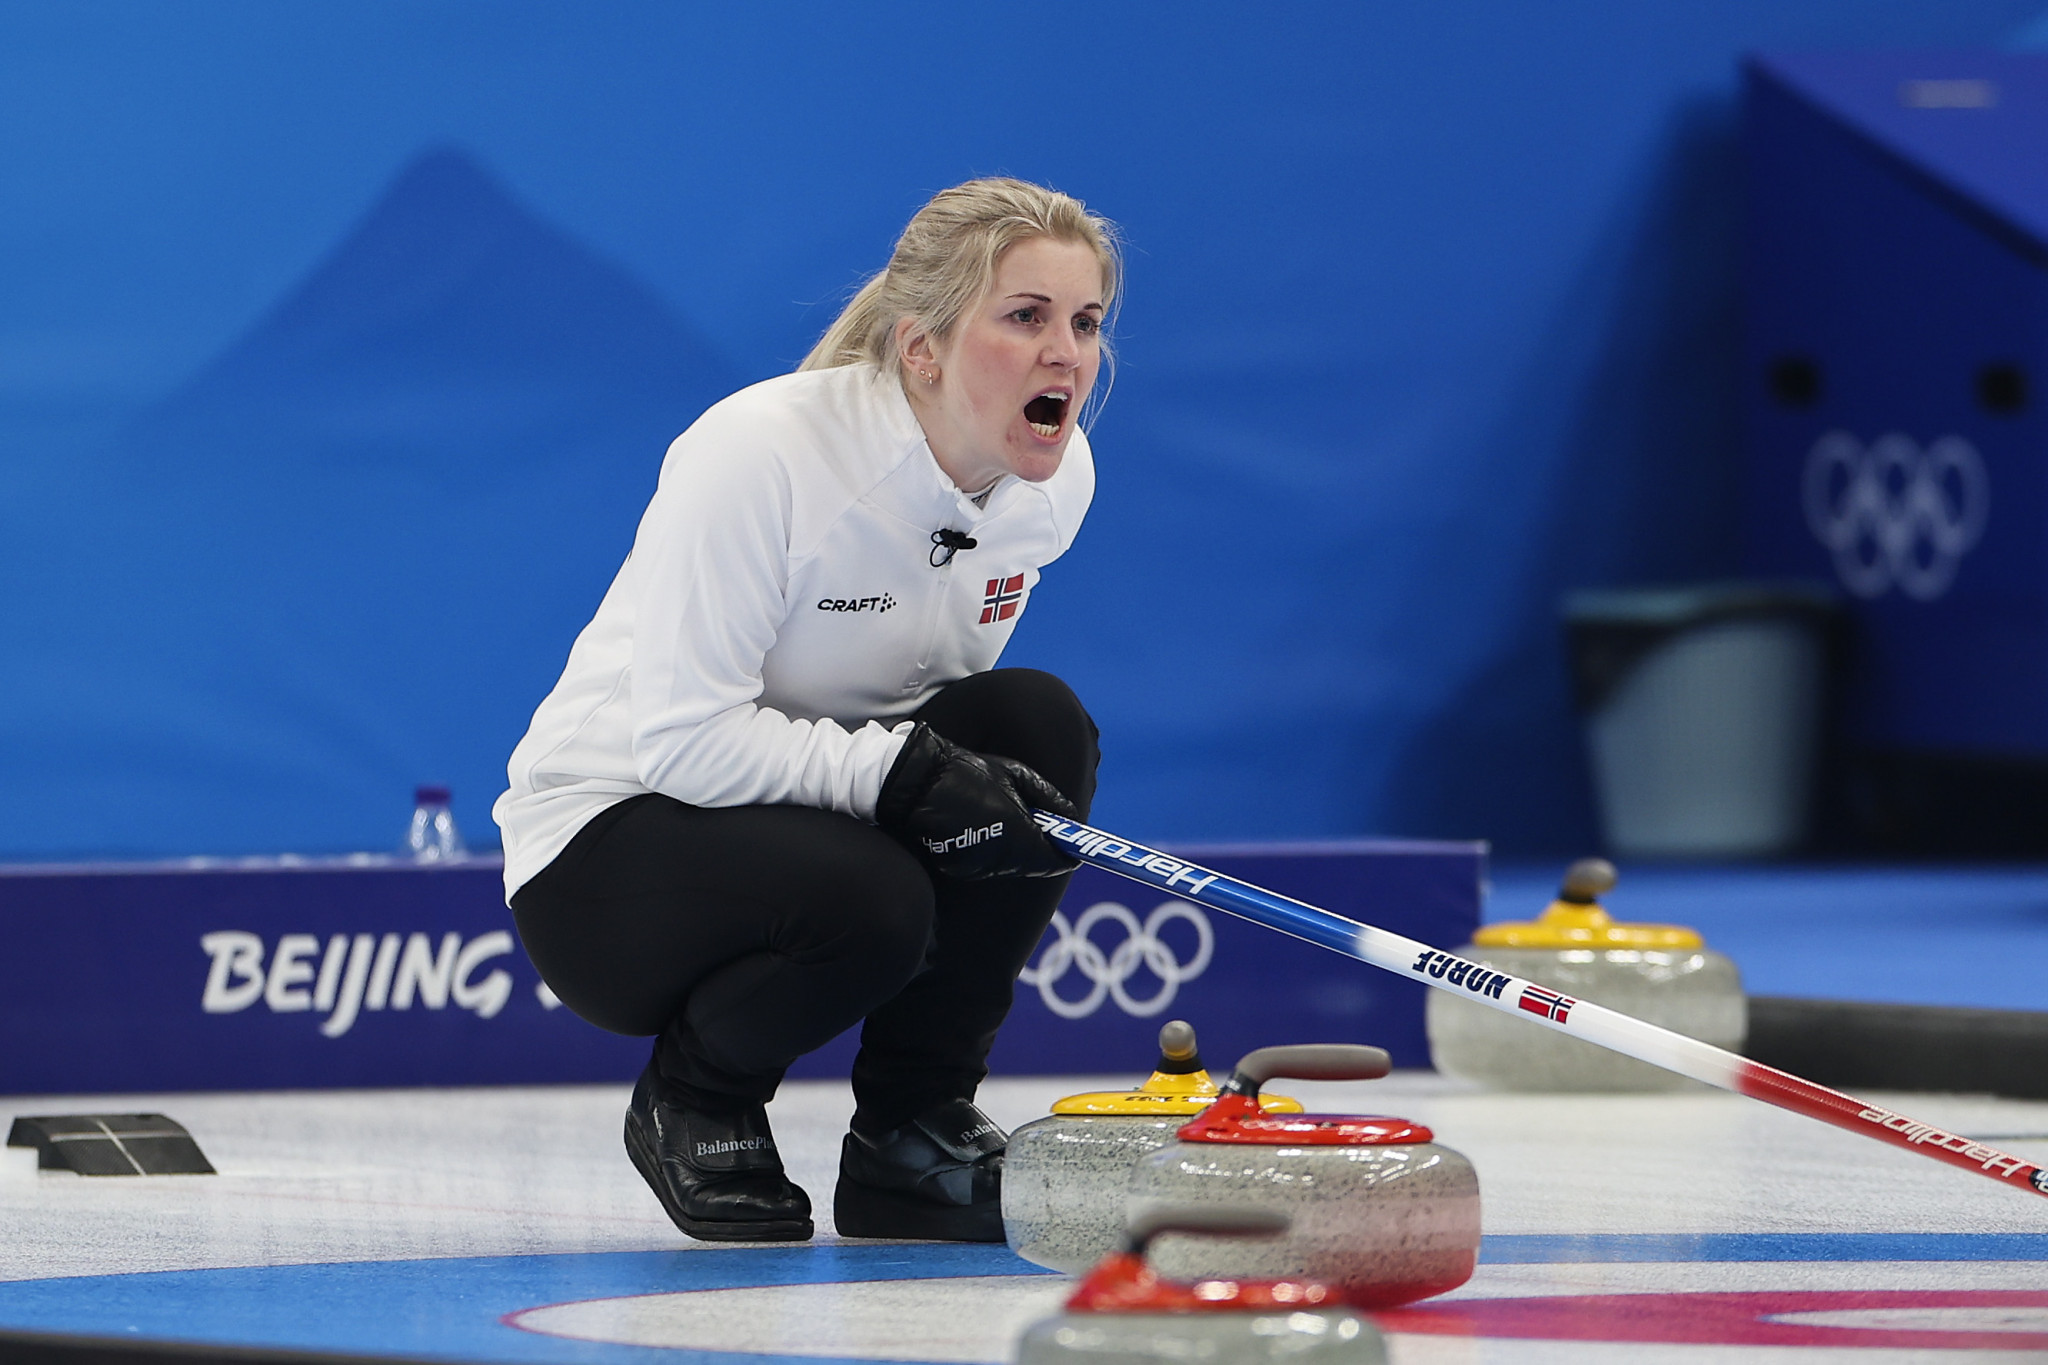 Norway won against United States today in the mixed doubles curling ©Getty Images